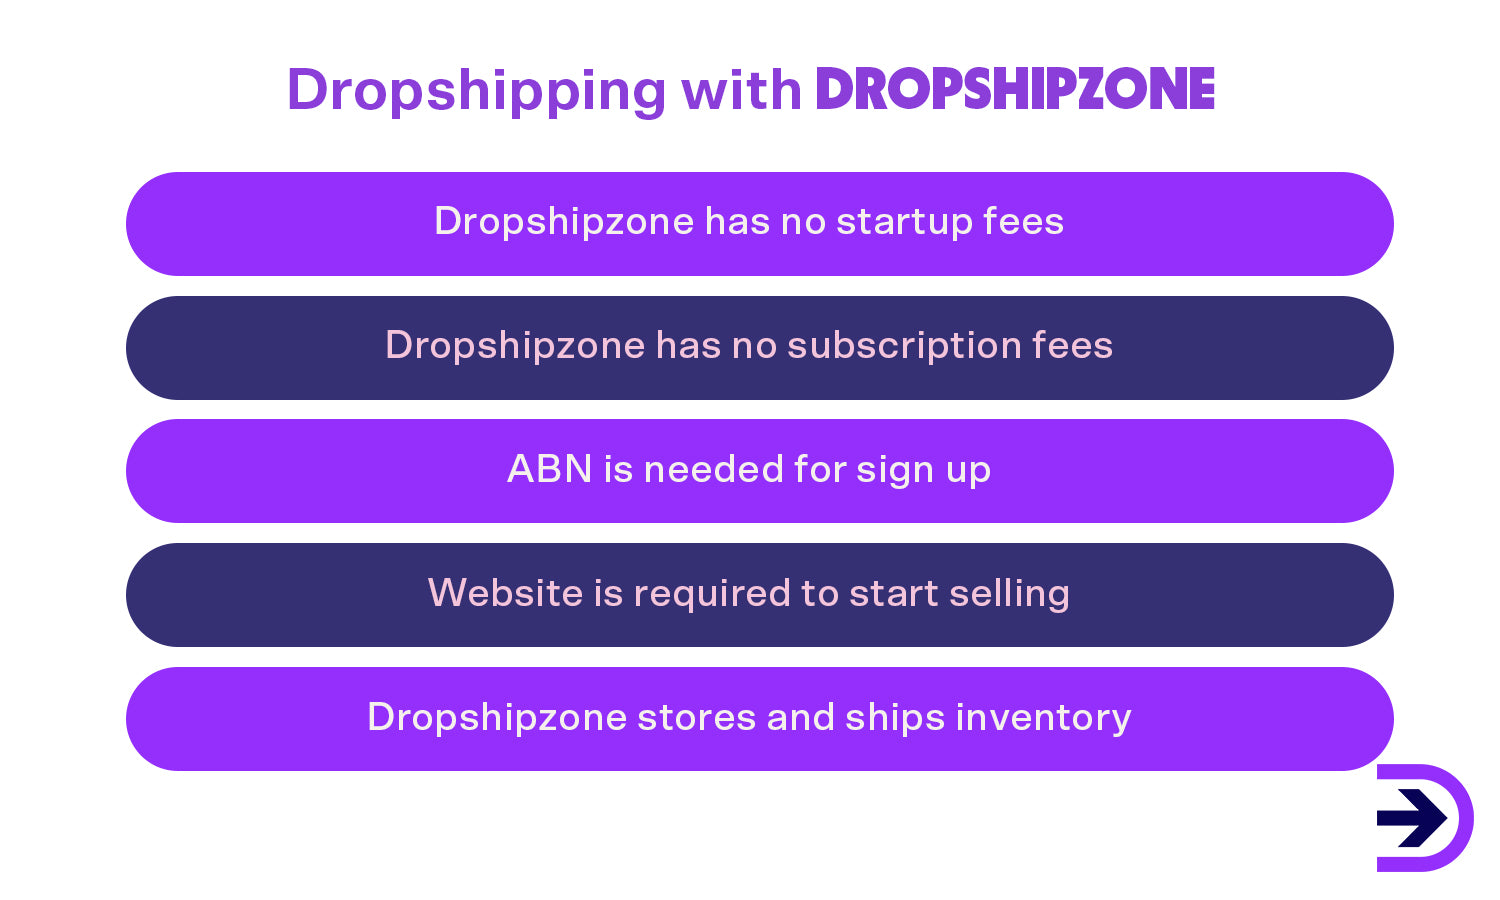 Reduce the risk of a lengthy supply chain and start dropshipping with Dropshipzone.